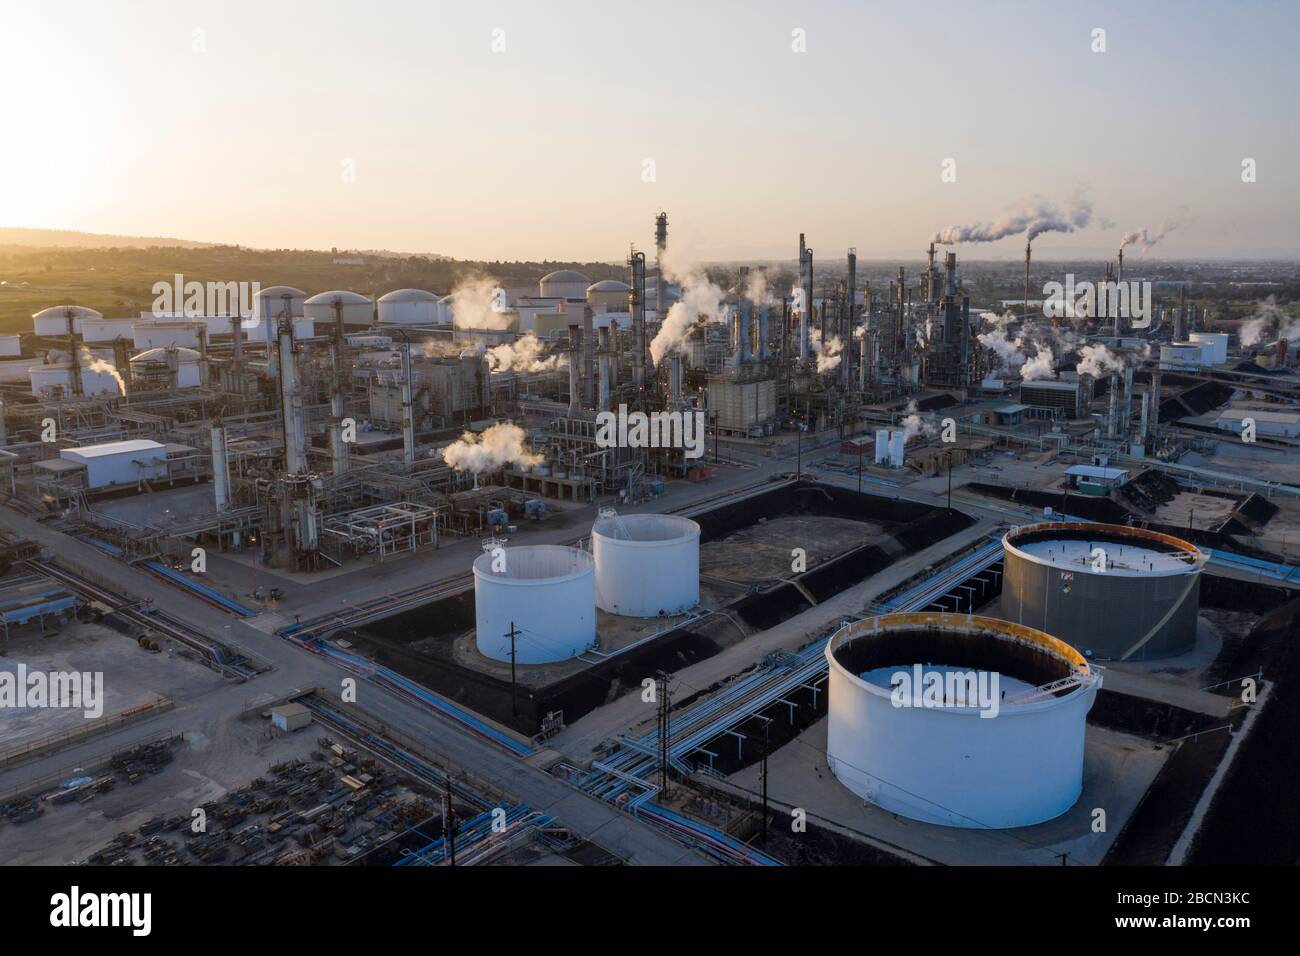 Aerial view of oil refinery Stock Photo